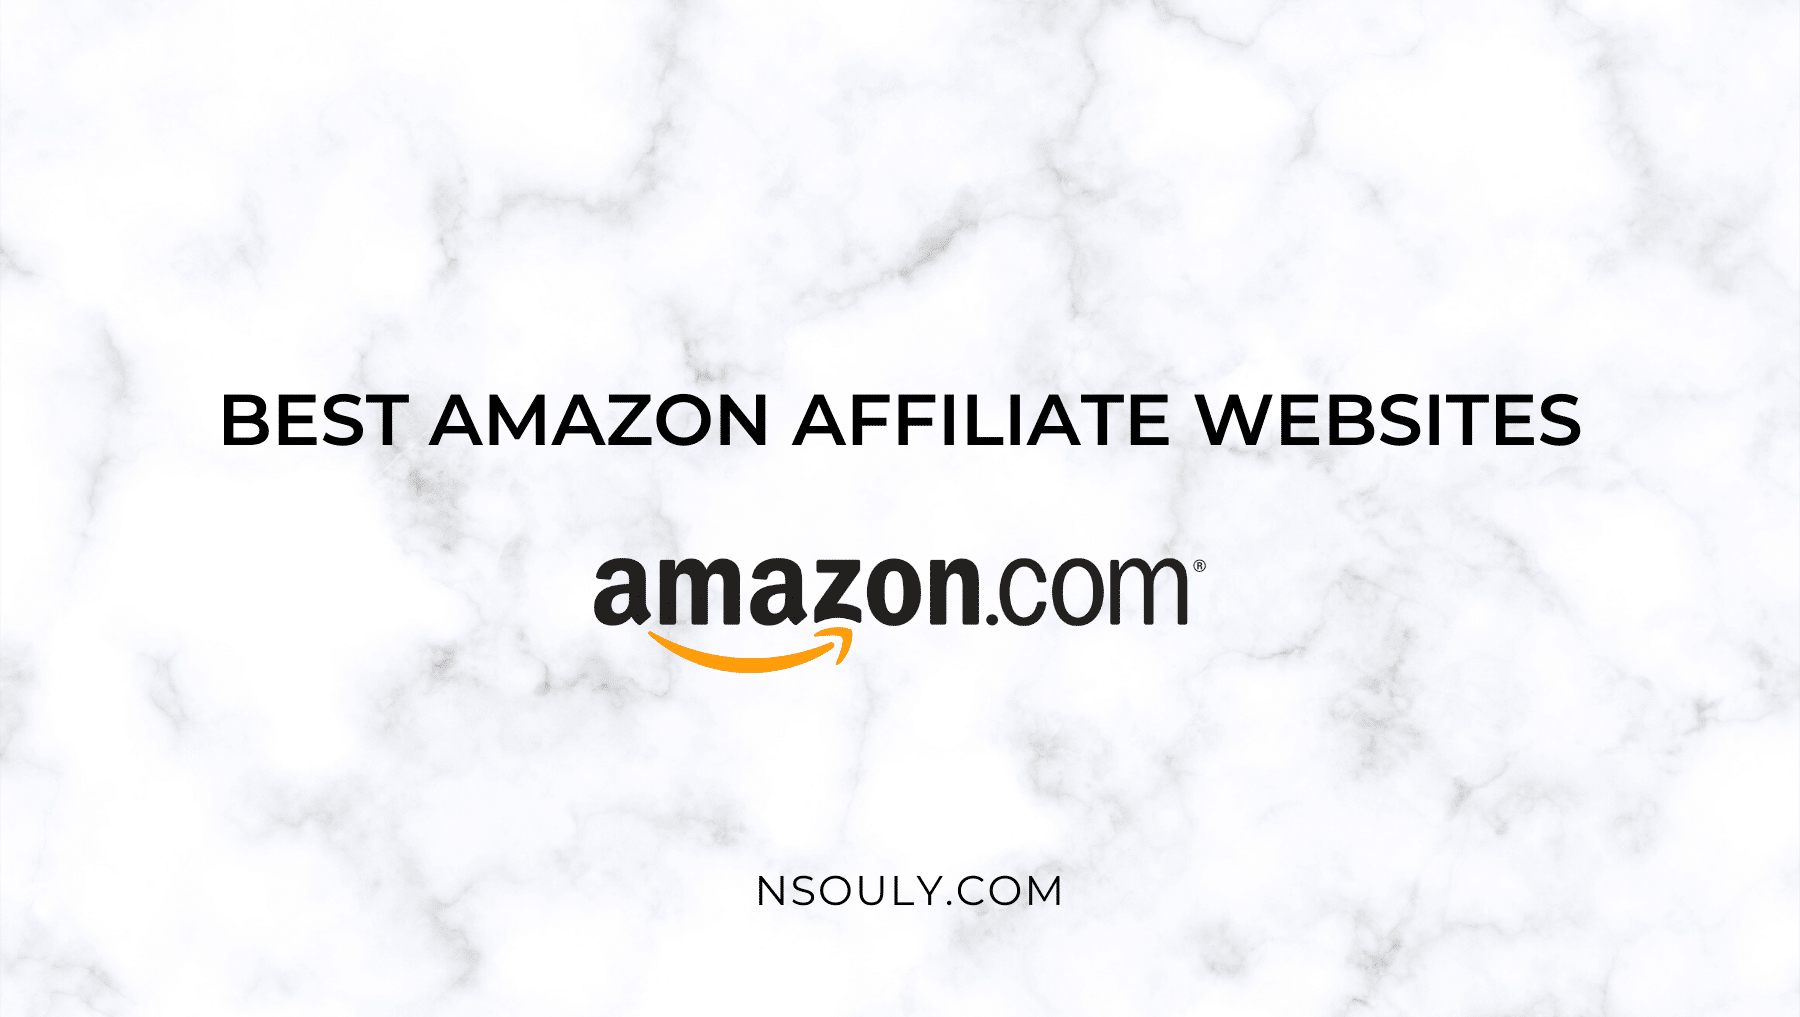 The Best Amazon Affiliate Websites and Their Incredible Strategies